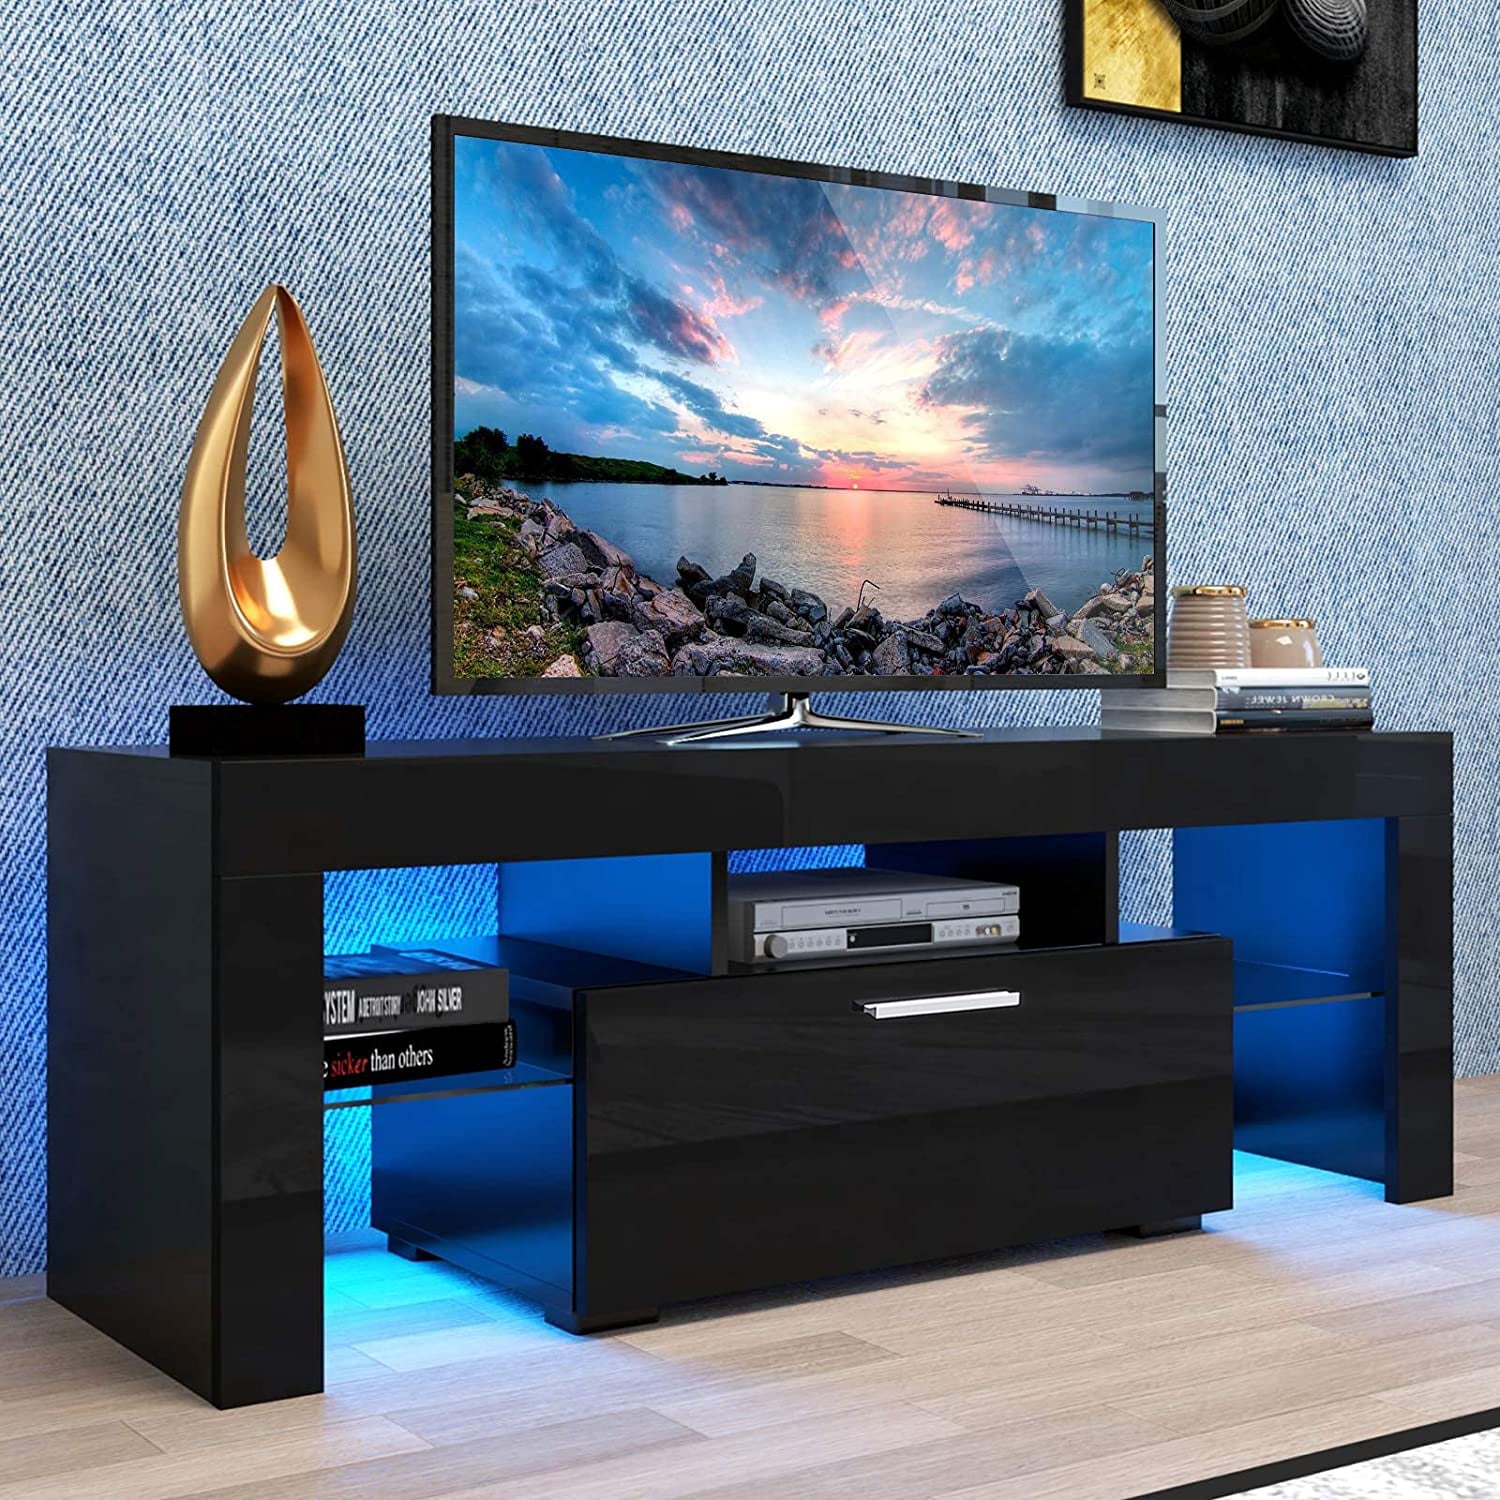 SEVENTH TV Stand with Lights, Black High Glossy TV Cabinet with Storage Drawer and Shelf, Modern Entertainment Center Corner TV Console Table for Living Room Lounge Room, 51" L x 14" W x 18" H, J4182